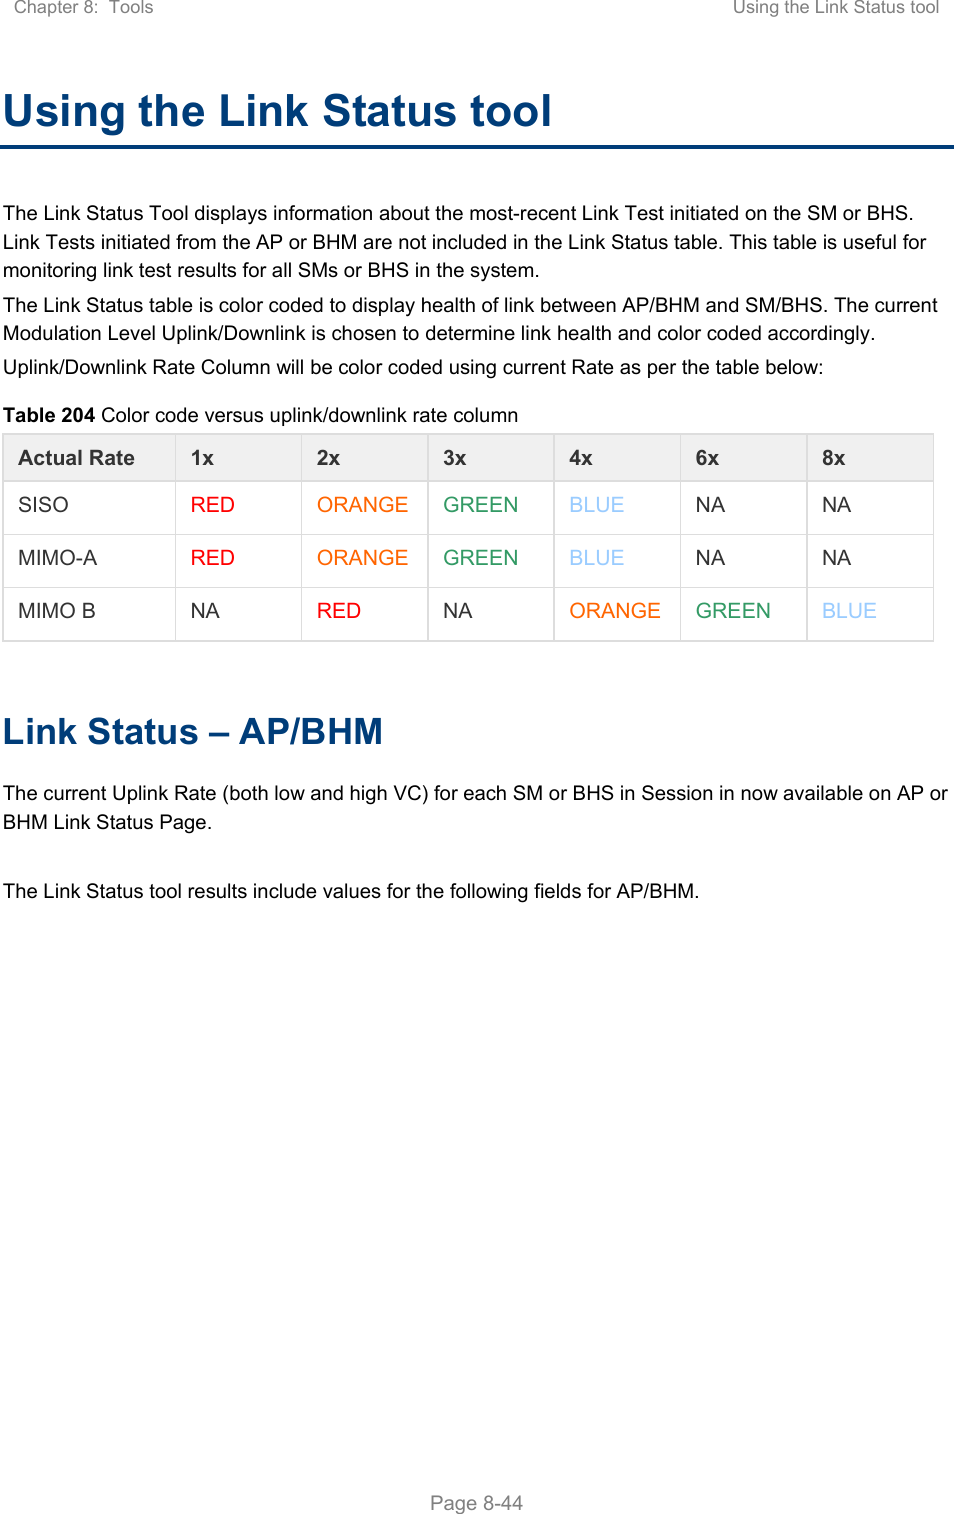 Chapter 8:  Tools  Using the Link Status tool   Page 8-44 Using the Link Status tool The Link Status Tool displays information about the most-recent Link Test initiated on the SM or BHS. Link Tests initiated from the AP or BHM are not included in the Link Status table. This table is useful for monitoring link test results for all SMs or BHS in the system. The Link Status table is color coded to display health of link between AP/BHM and SM/BHS. The current Modulation Level Uplink/Downlink is chosen to determine link health and color coded accordingly. Uplink/Downlink Rate Column will be color coded using current Rate as per the table below: Table 204 Color code versus uplink/downlink rate column Actual Rate  1x  2x    3x  4x  6x  8x SISO  RED ORANGE GREEN BLUE NA  NA MIMO-A  RED ORANGE GREEN BLUE NA  NA MIMO B  NA  RED NA  ORANGE GREEN BLUE  Link Status – AP/BHM The current Uplink Rate (both low and high VC) for each SM or BHS in Session in now available on AP or BHM Link Status Page.  The Link Status tool results include values for the following fields for AP/BHM. 